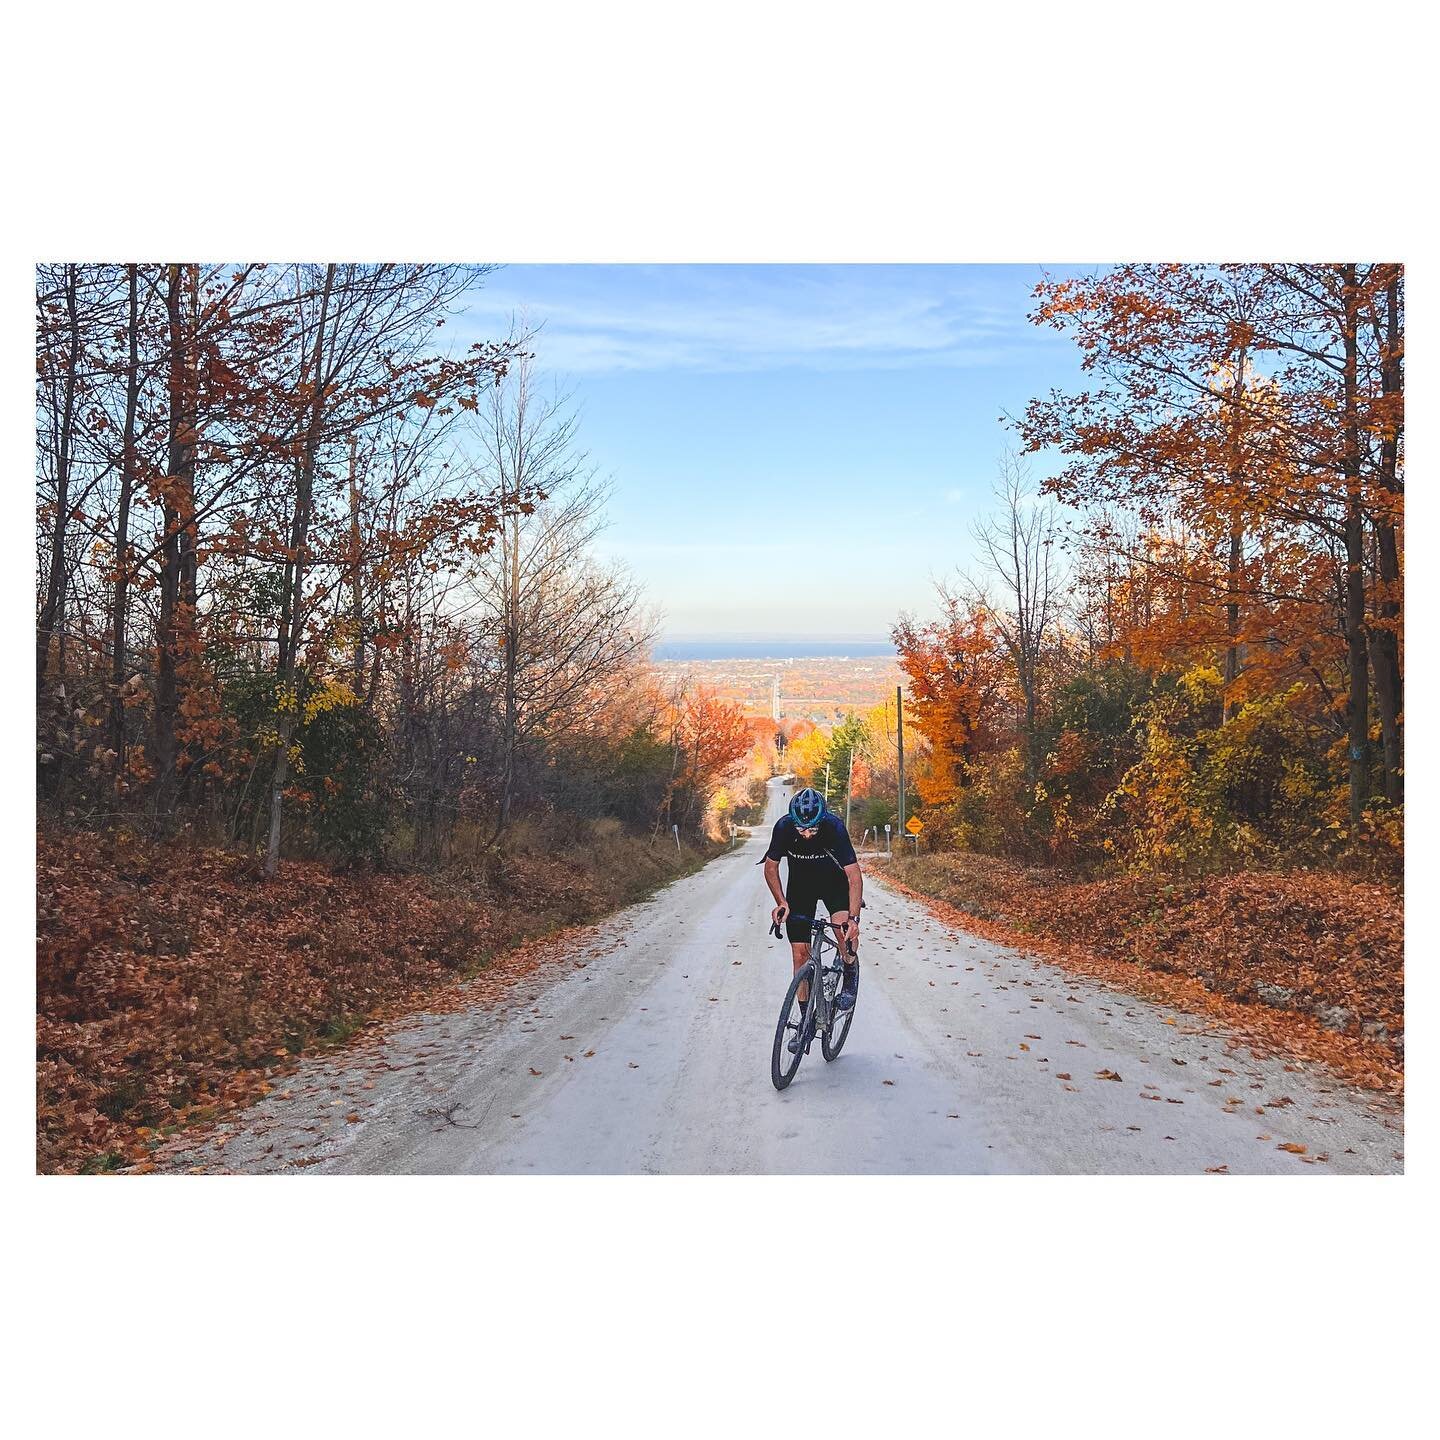 ⠀⠀⠀⠀⠀⠀⠀⠀⠀
One last fall ride with friends before shutting down for a few weeks.  See you in a bit Insta world, I&rsquo;m out.
⠀⠀⠀⠀⠀⠀⠀⠀⠀
*Out of office engaged*

⠀⠀⠀⠀⠀⠀⠀⠀⠀